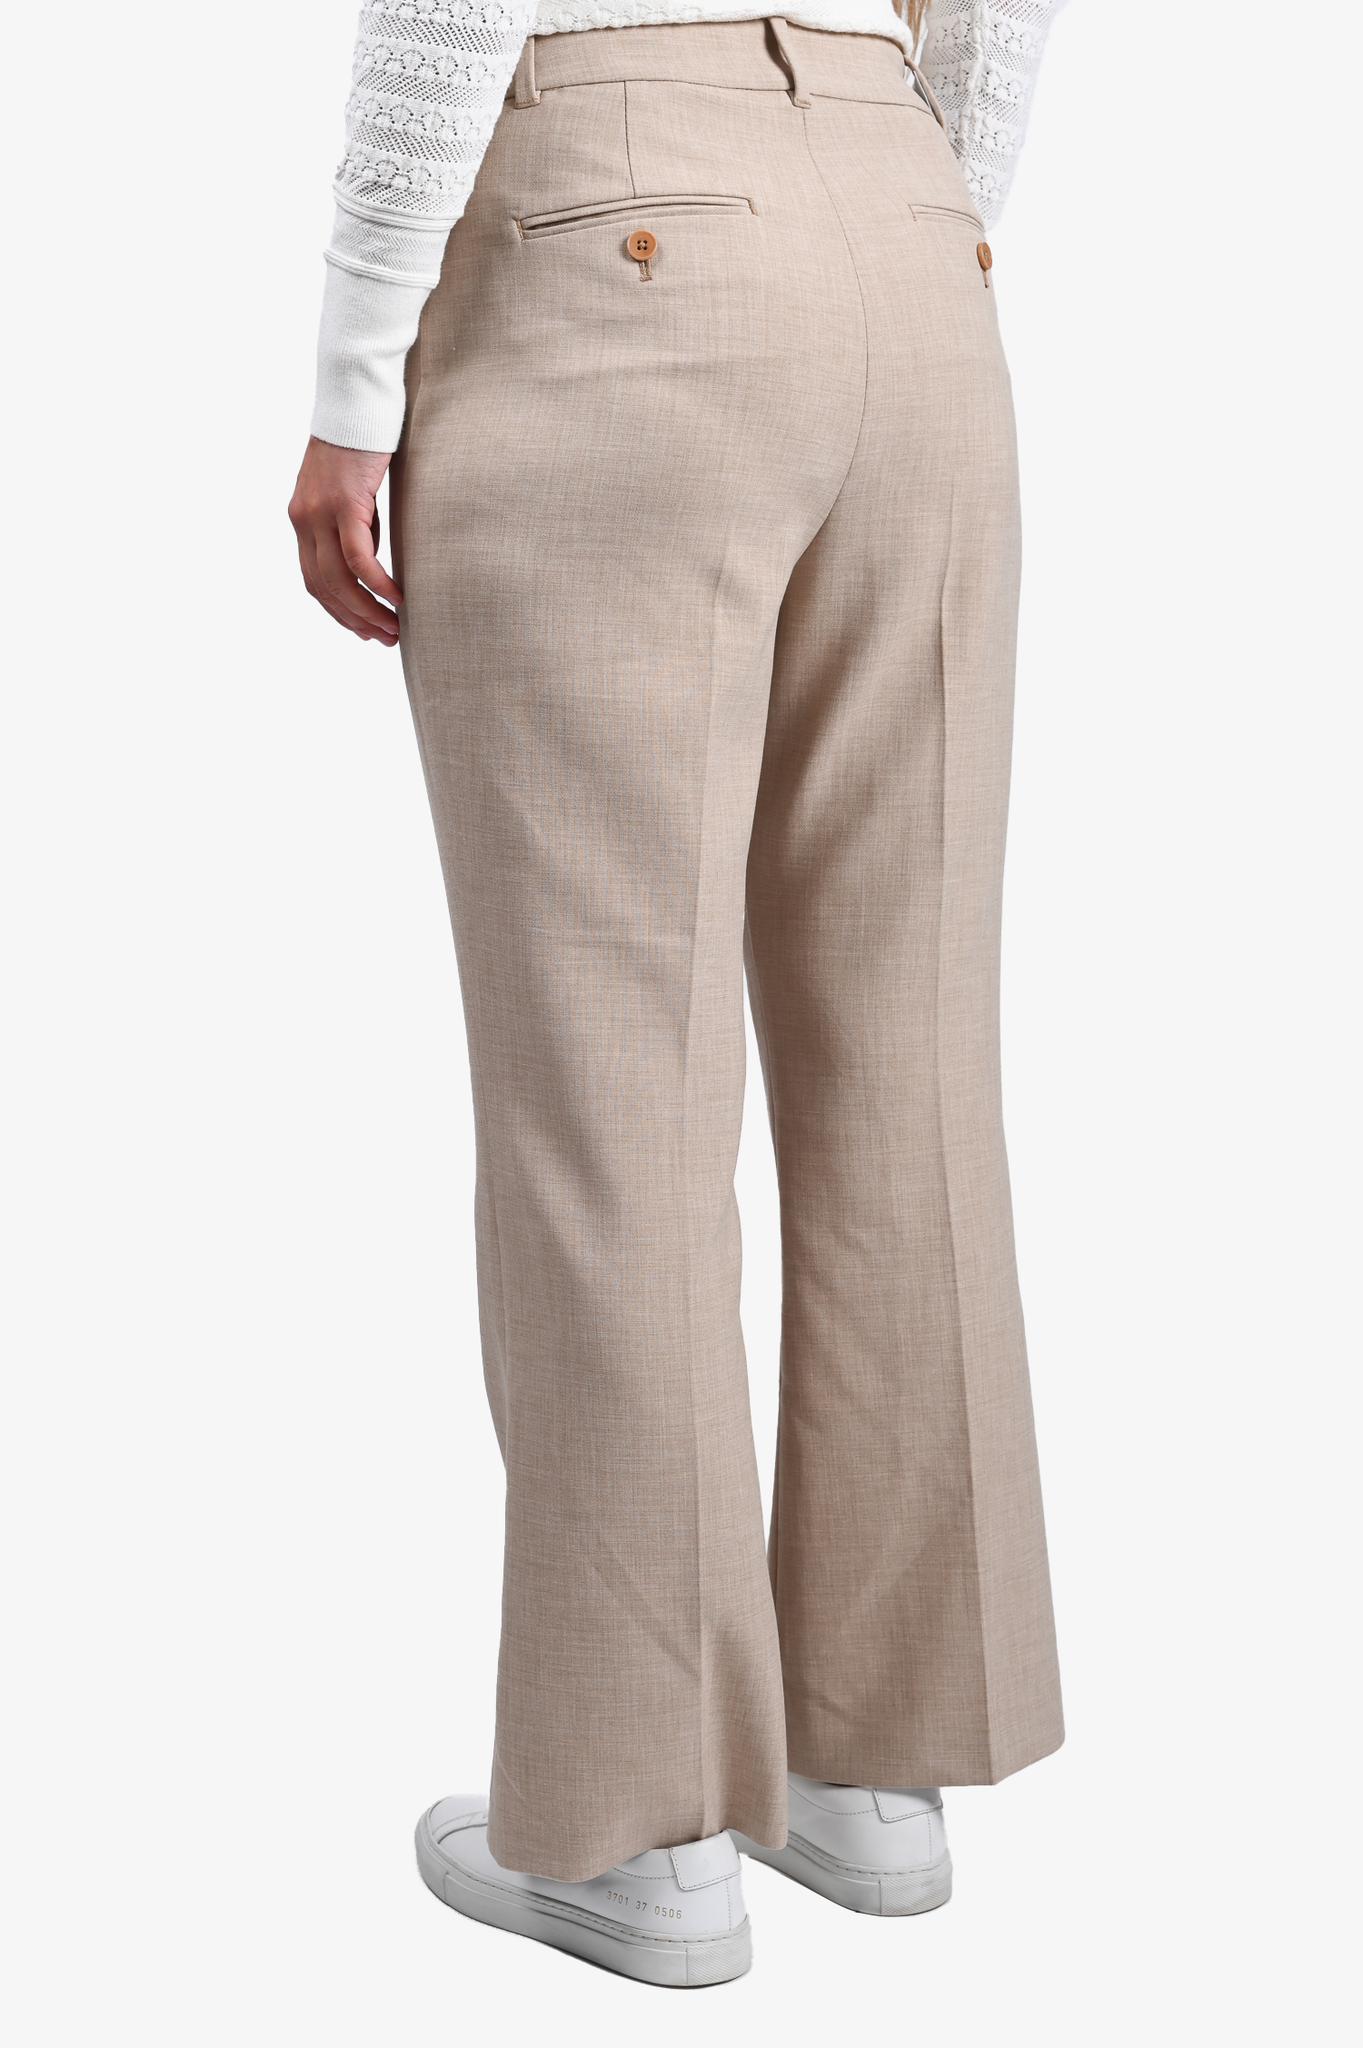 Wilfred Beige 'Vivace' Flared Trousers Size 10